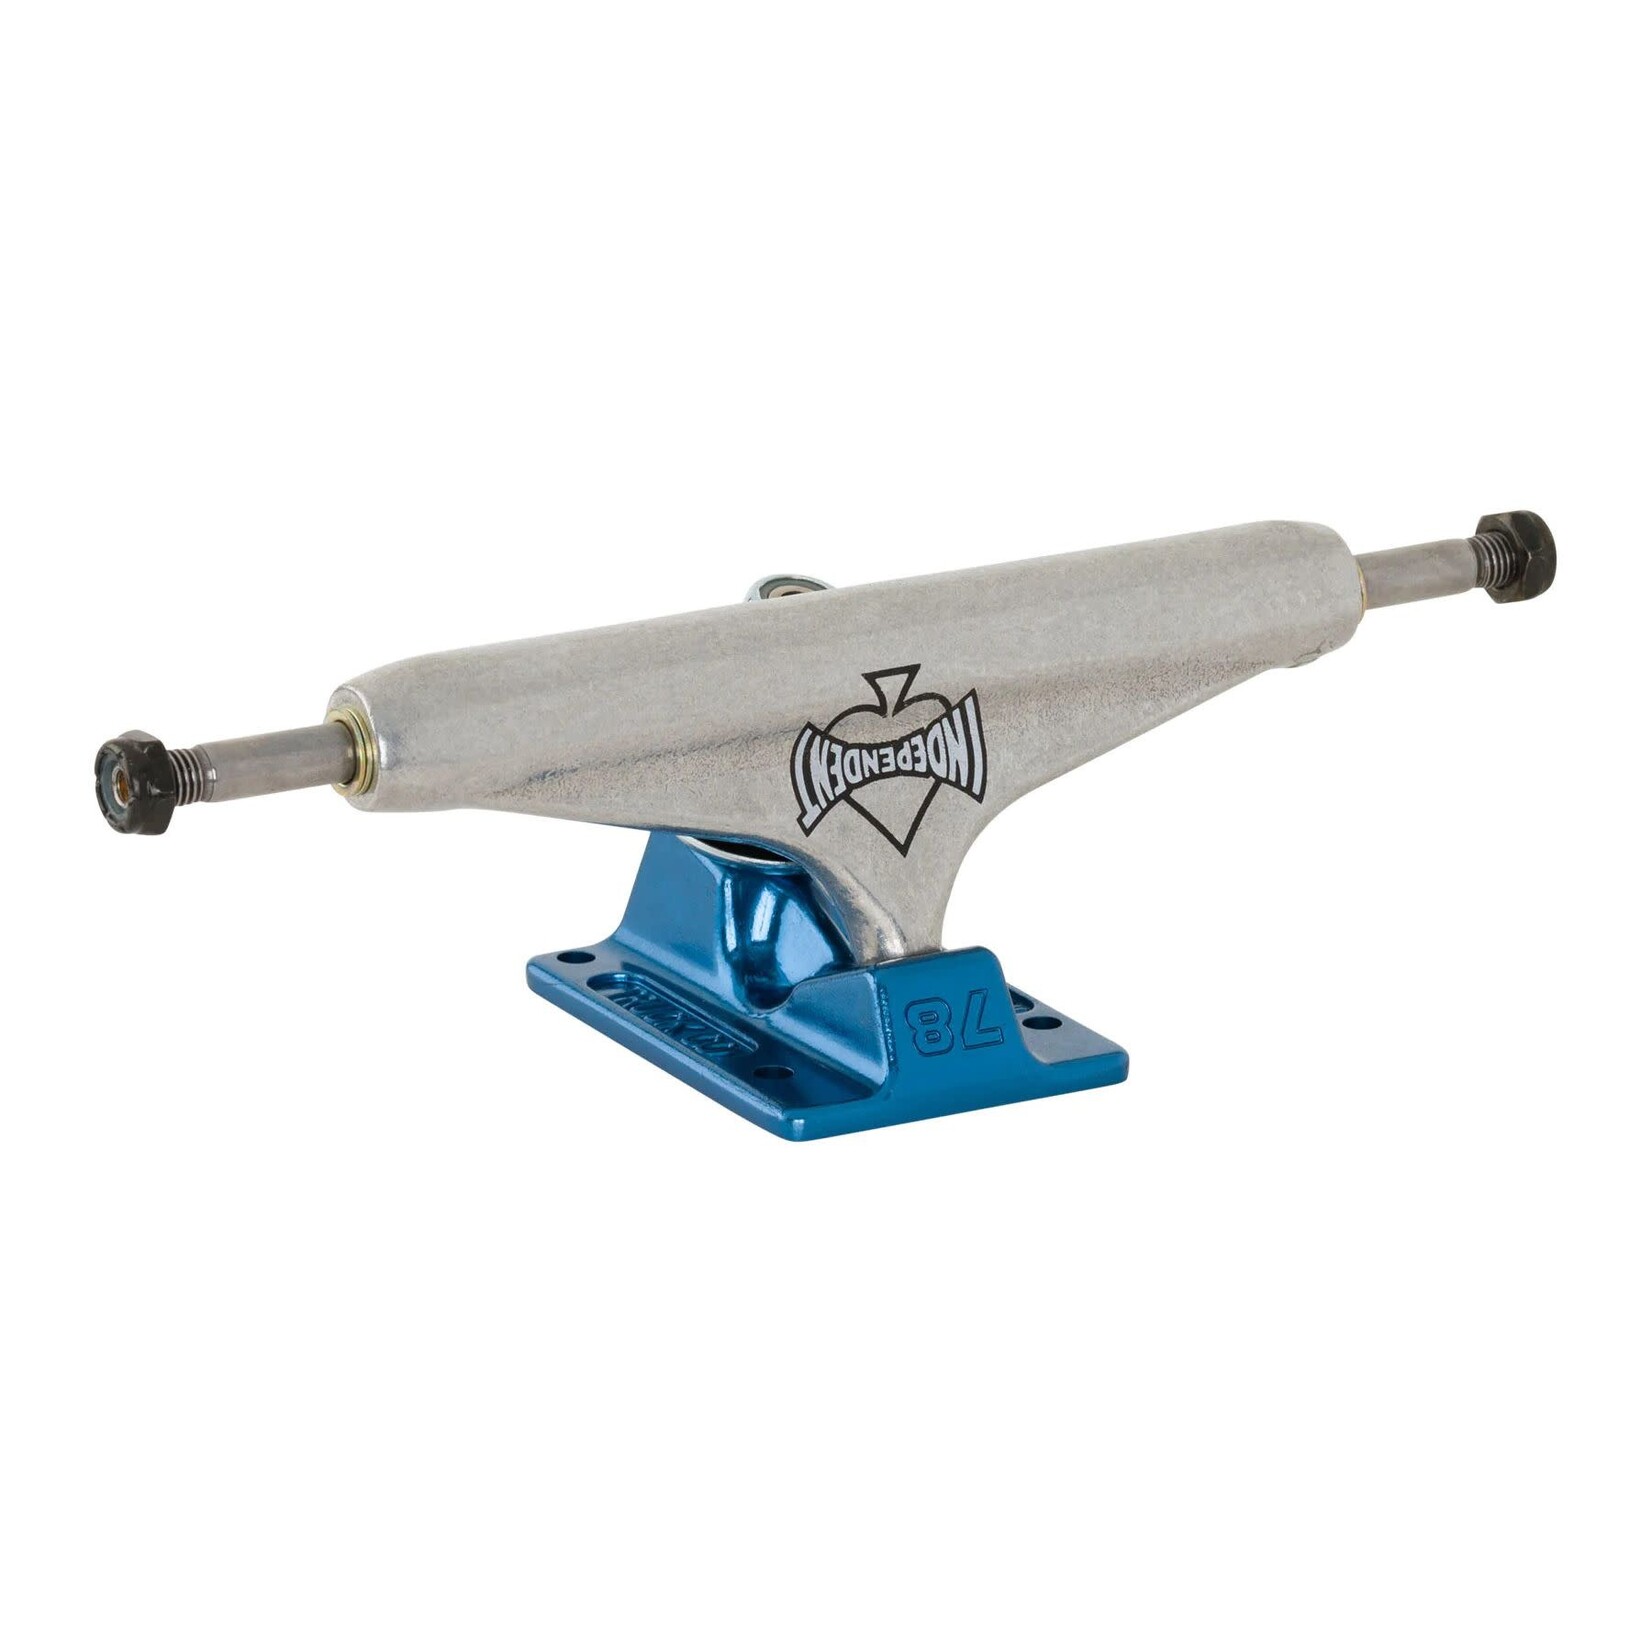 Independent Independent - Forged Hollow - 78 Trucks - Ano Blue - 144mm